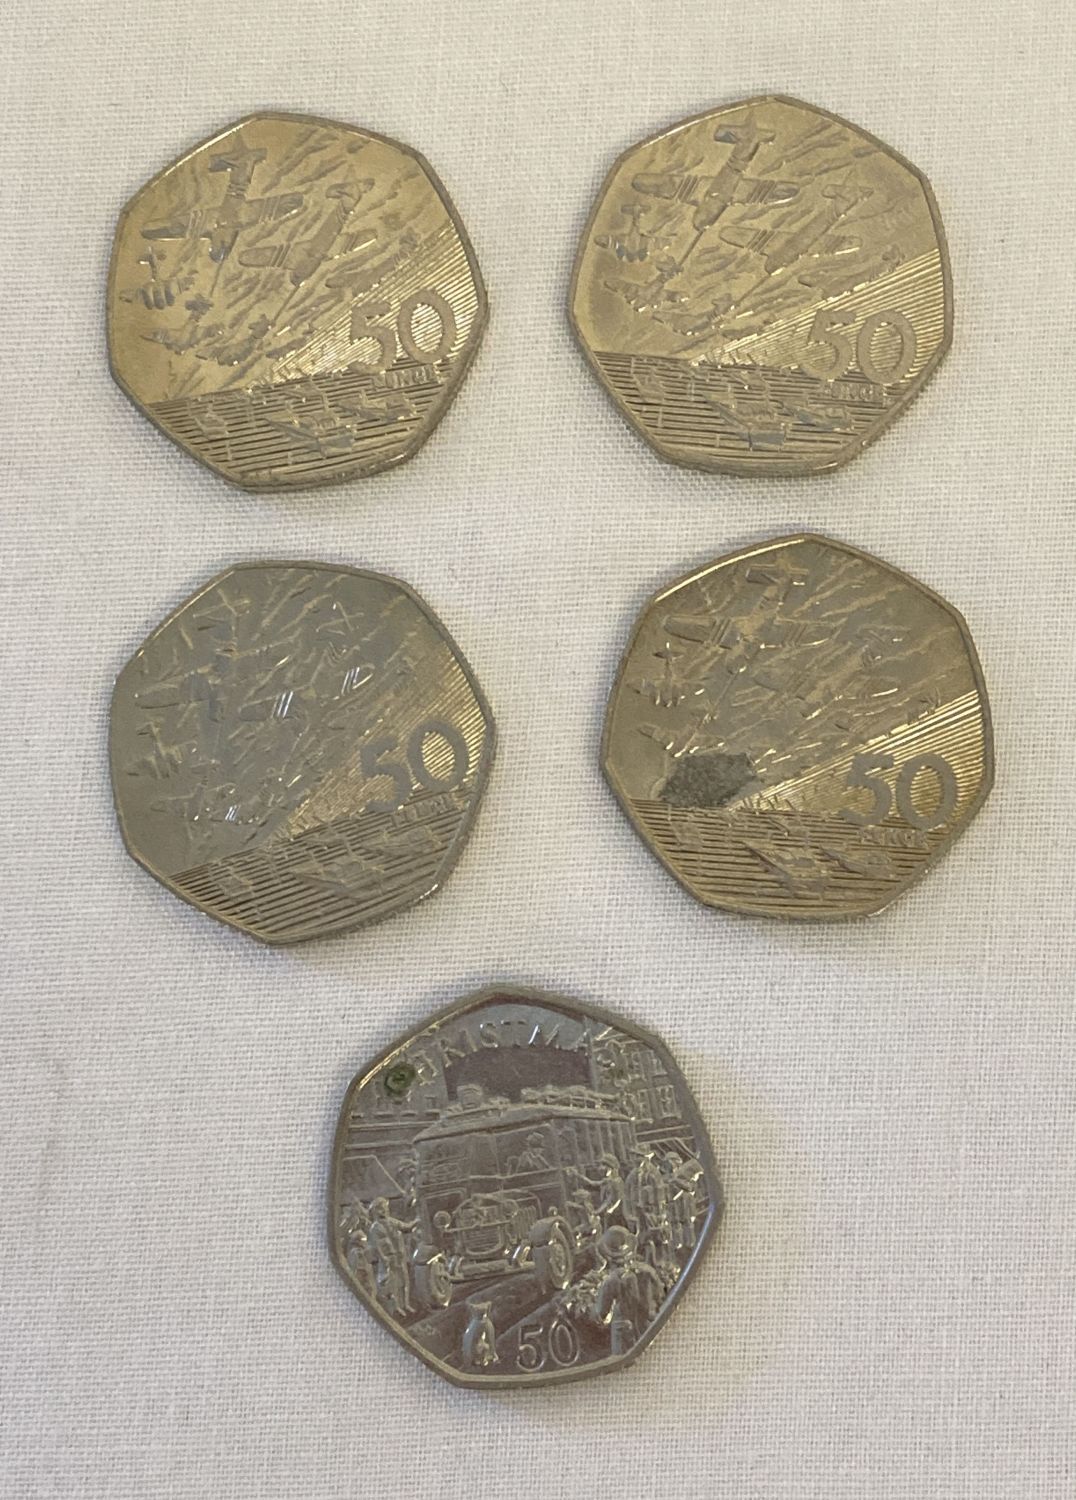 5 collectors 50p coins. An Isle Of Man 1987 Christmas coin together with 4 1994 D-Day coins.